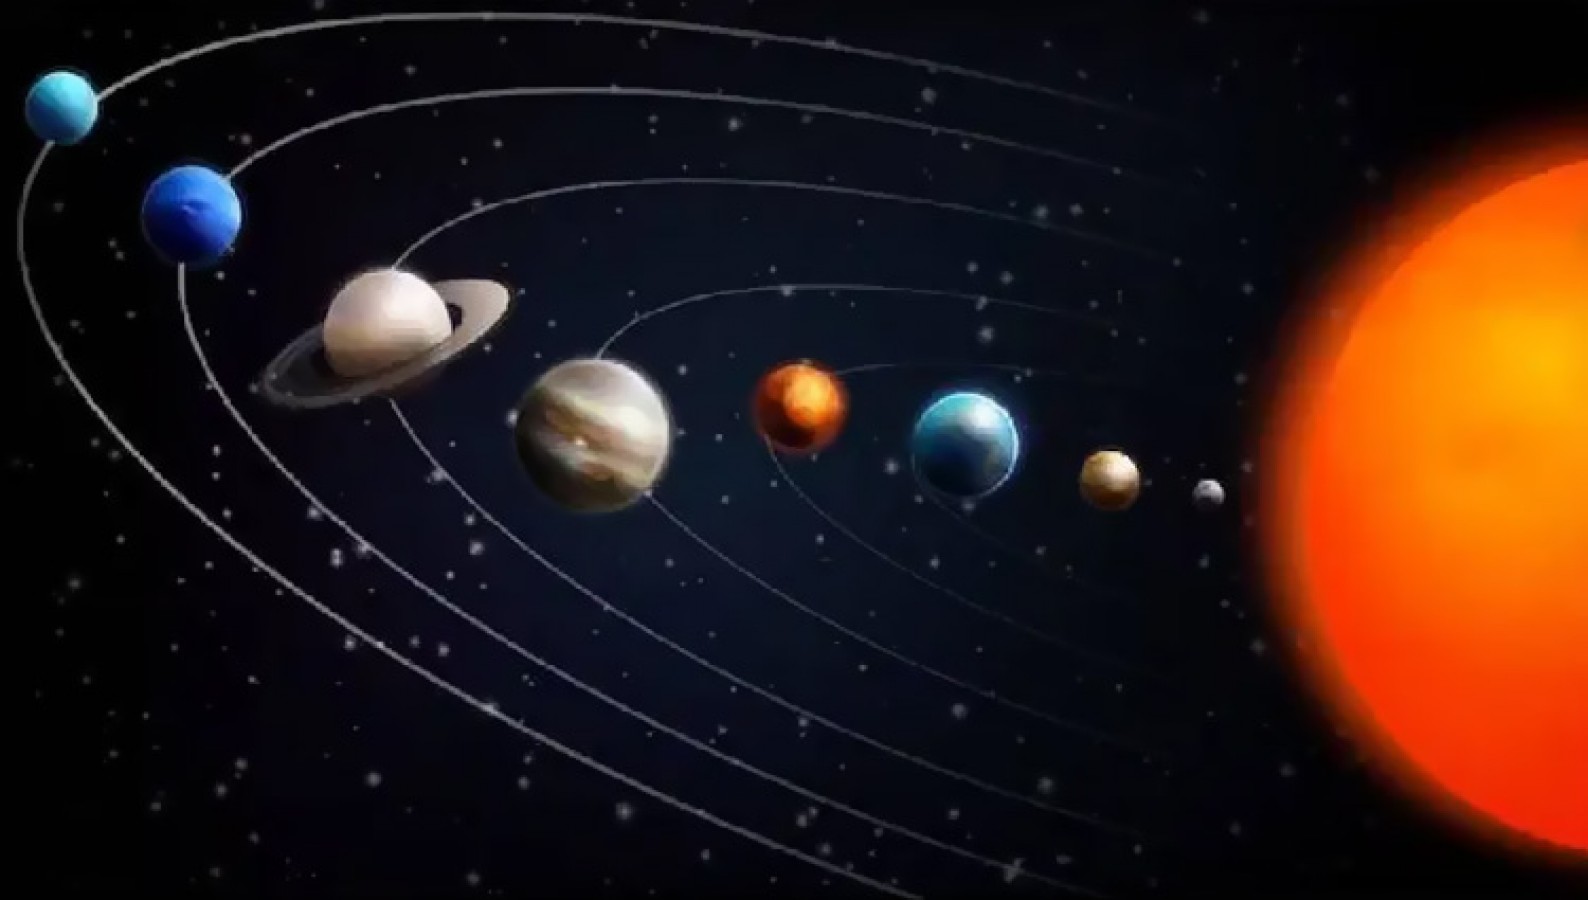 5 Planets in Sky : आज की रात आसमान में दिखेगा अद्भुत नजारा, एक साथ दिखेंगे 5 ग्रह- 5 Planets in Sky: Amazing view will be seen in the sky tonight, 5 planets will be seen together